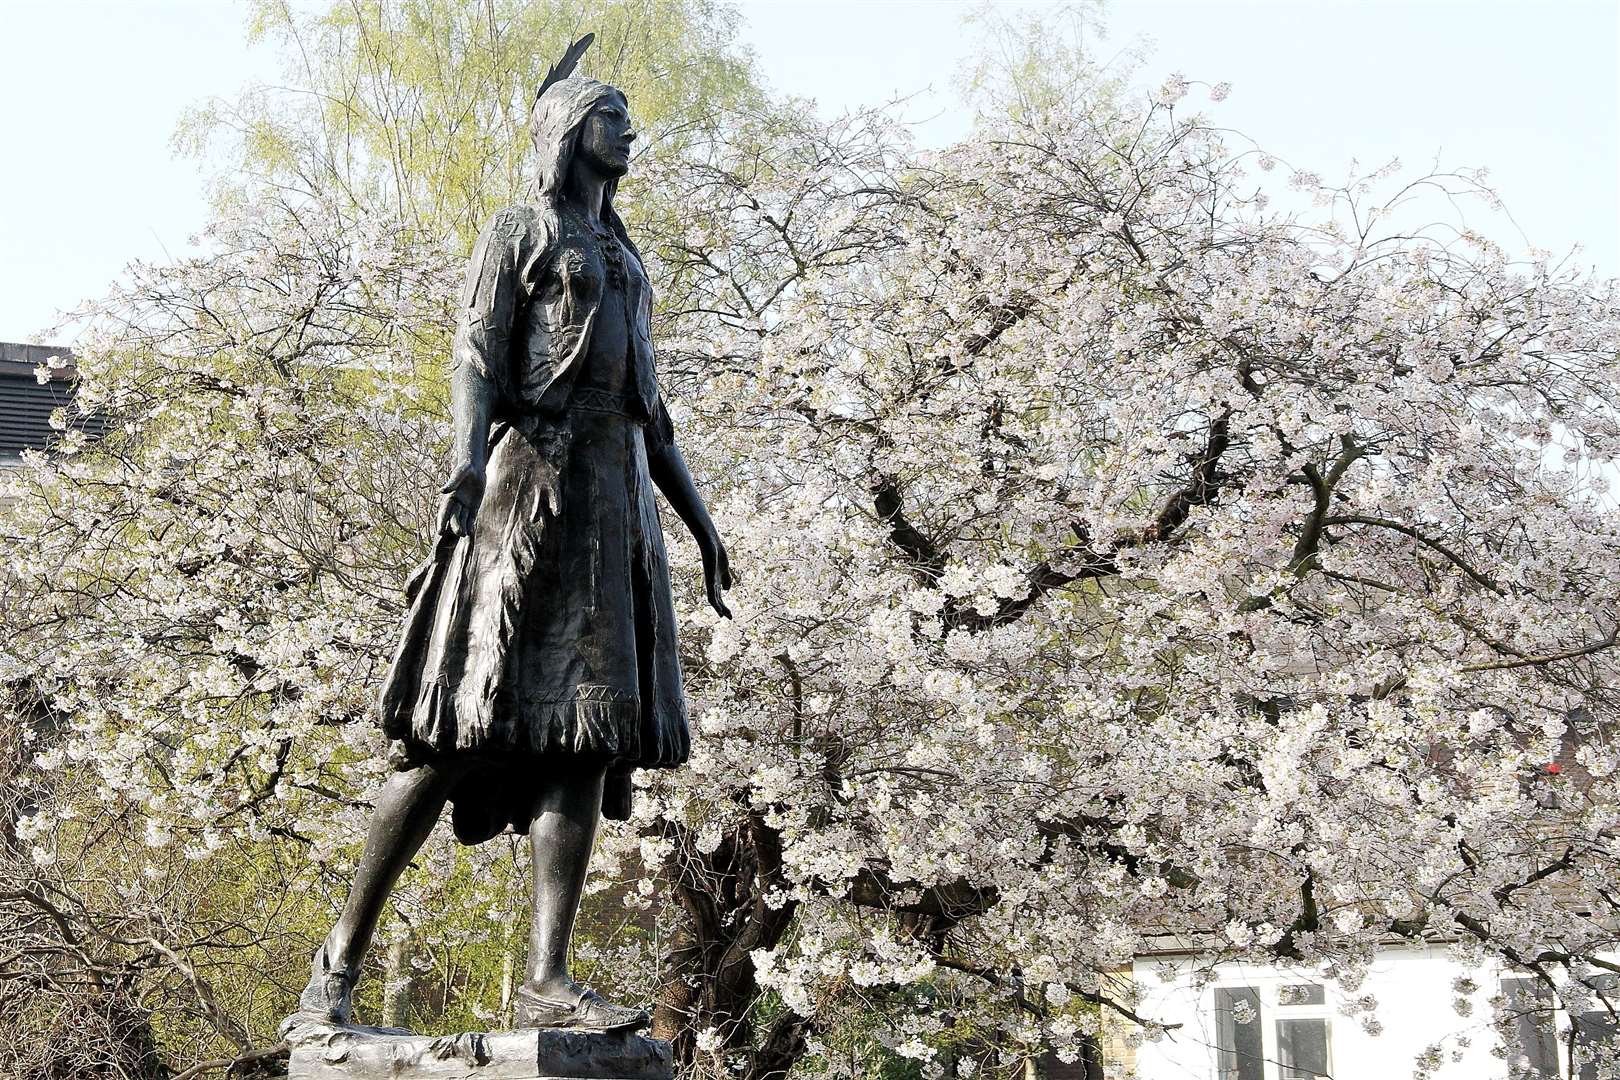 It is 405 years since Pocahontas died. Picture: Gravesham Borough Council